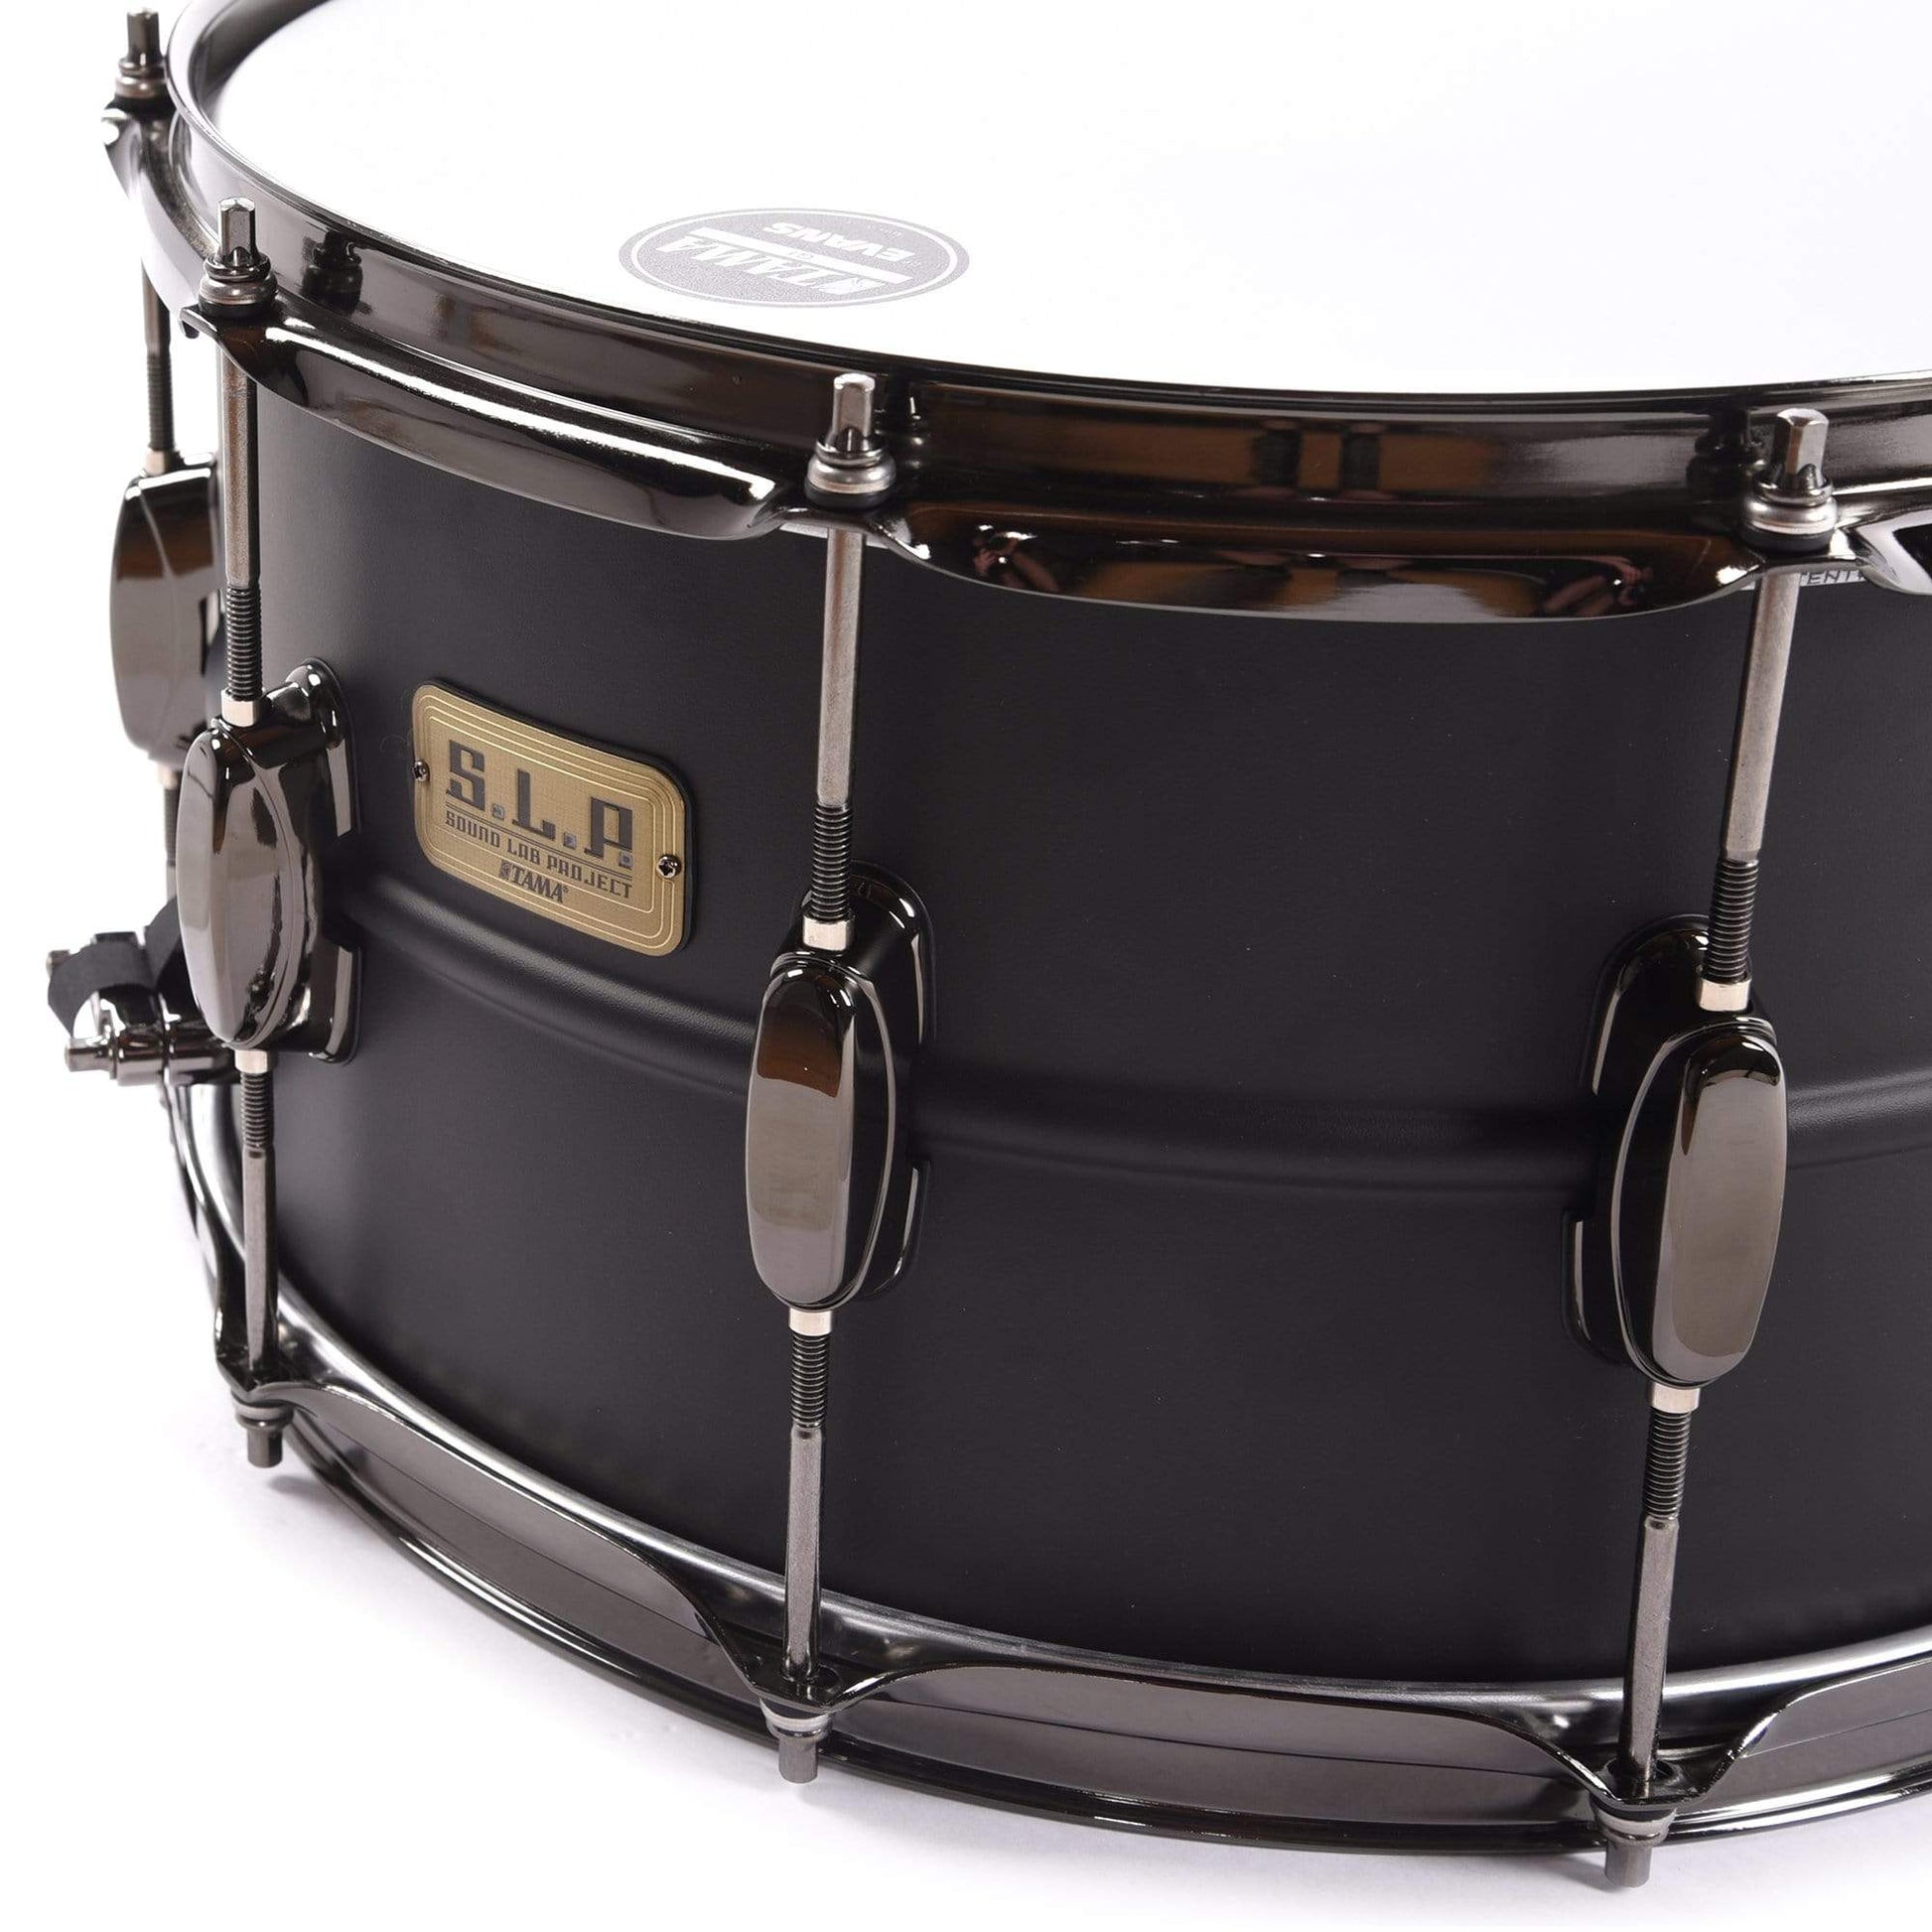 Tama 8x14 S.L.P. Big Black Steel Snare Drum Limited Edition Drums and Percussion / Acoustic Drums / Snare